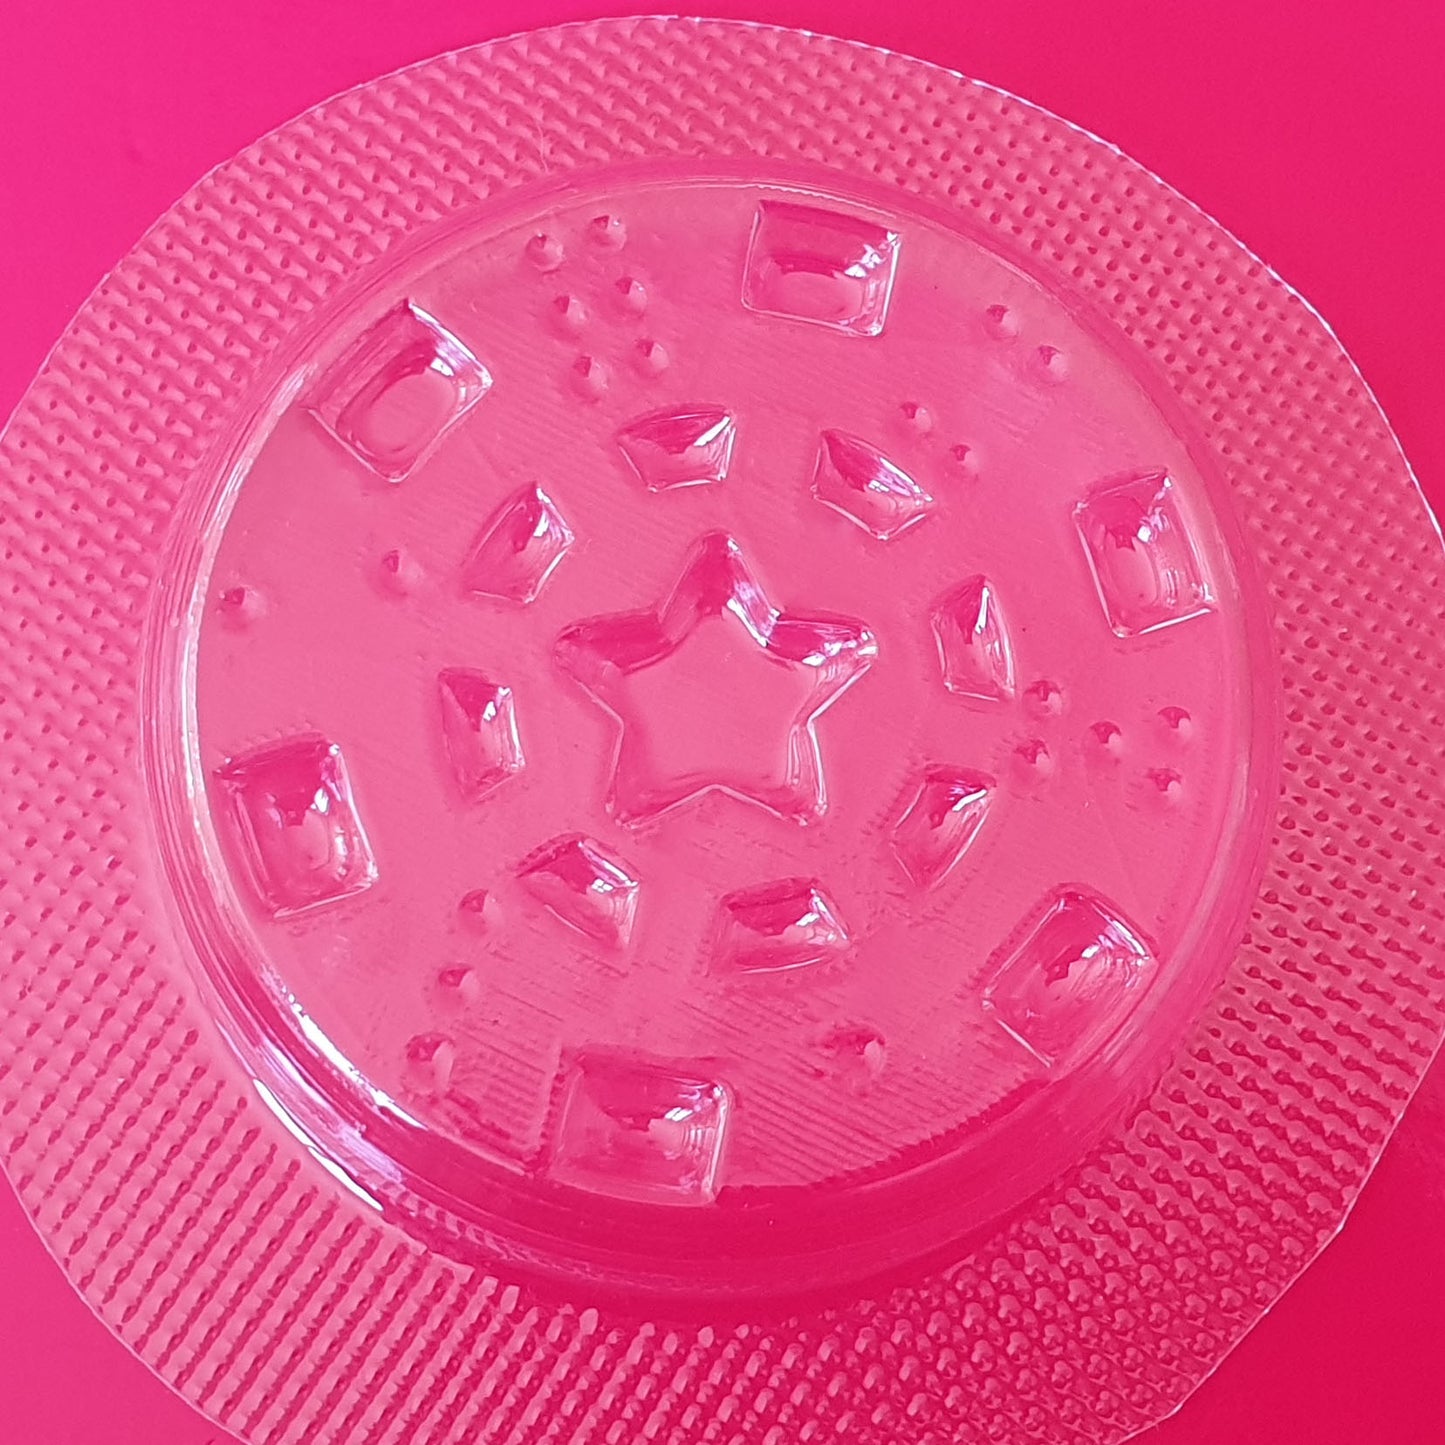 Poker Chip Bath Bomb Mould by Truly Personal